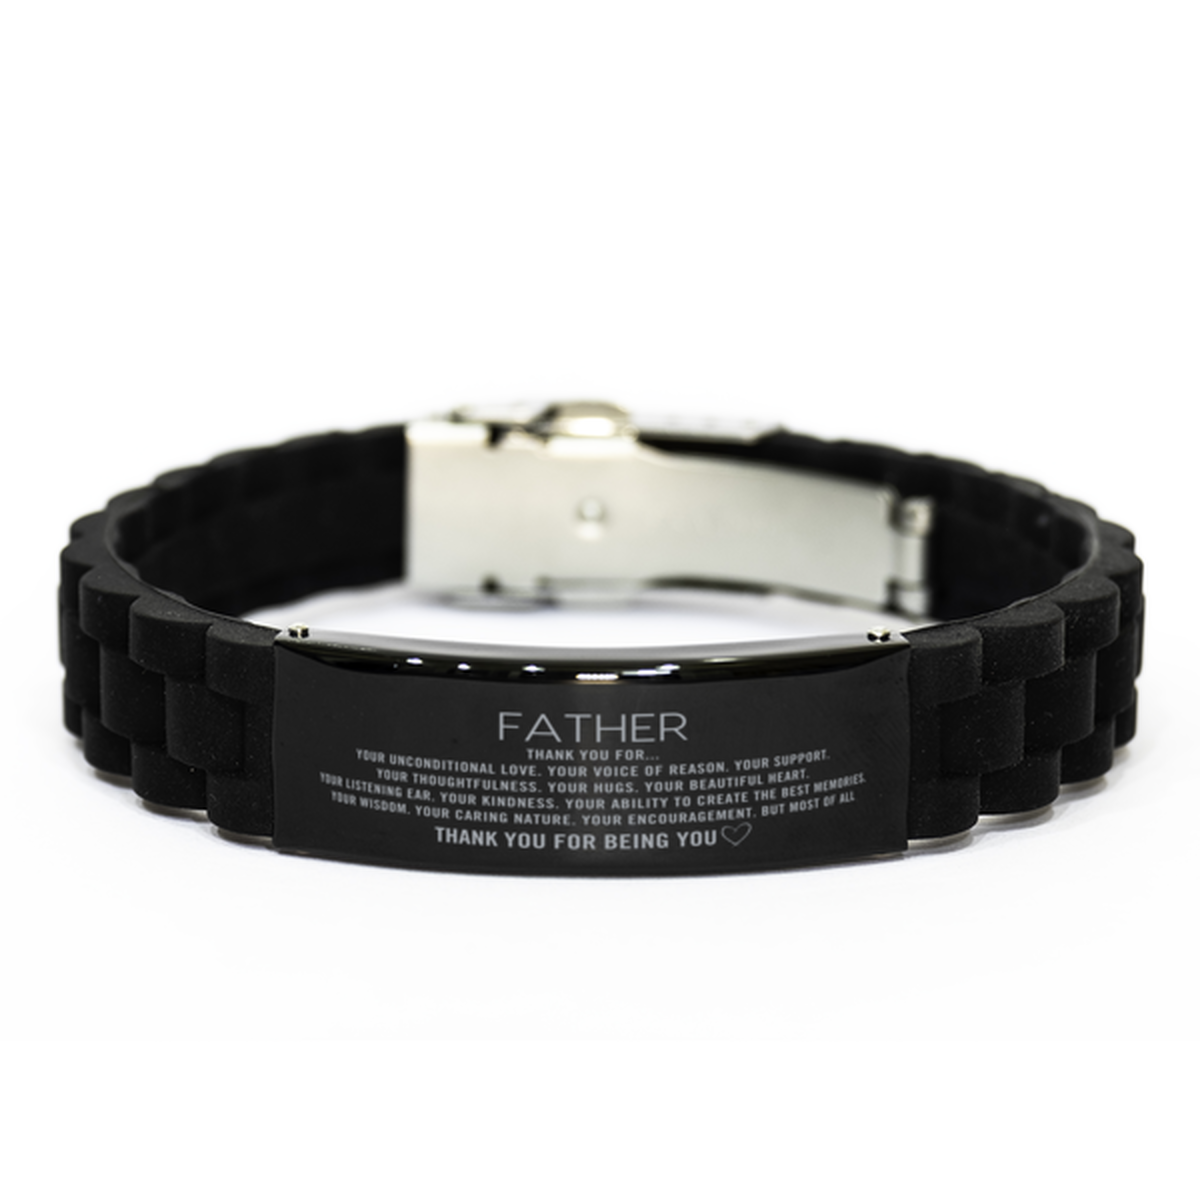 Father Black Glidelock Clasp Bracelet Custom, Engraved Gifts For Father Christmas Graduation Birthday Gifts for Men Women Father Thank you for Your unconditional love